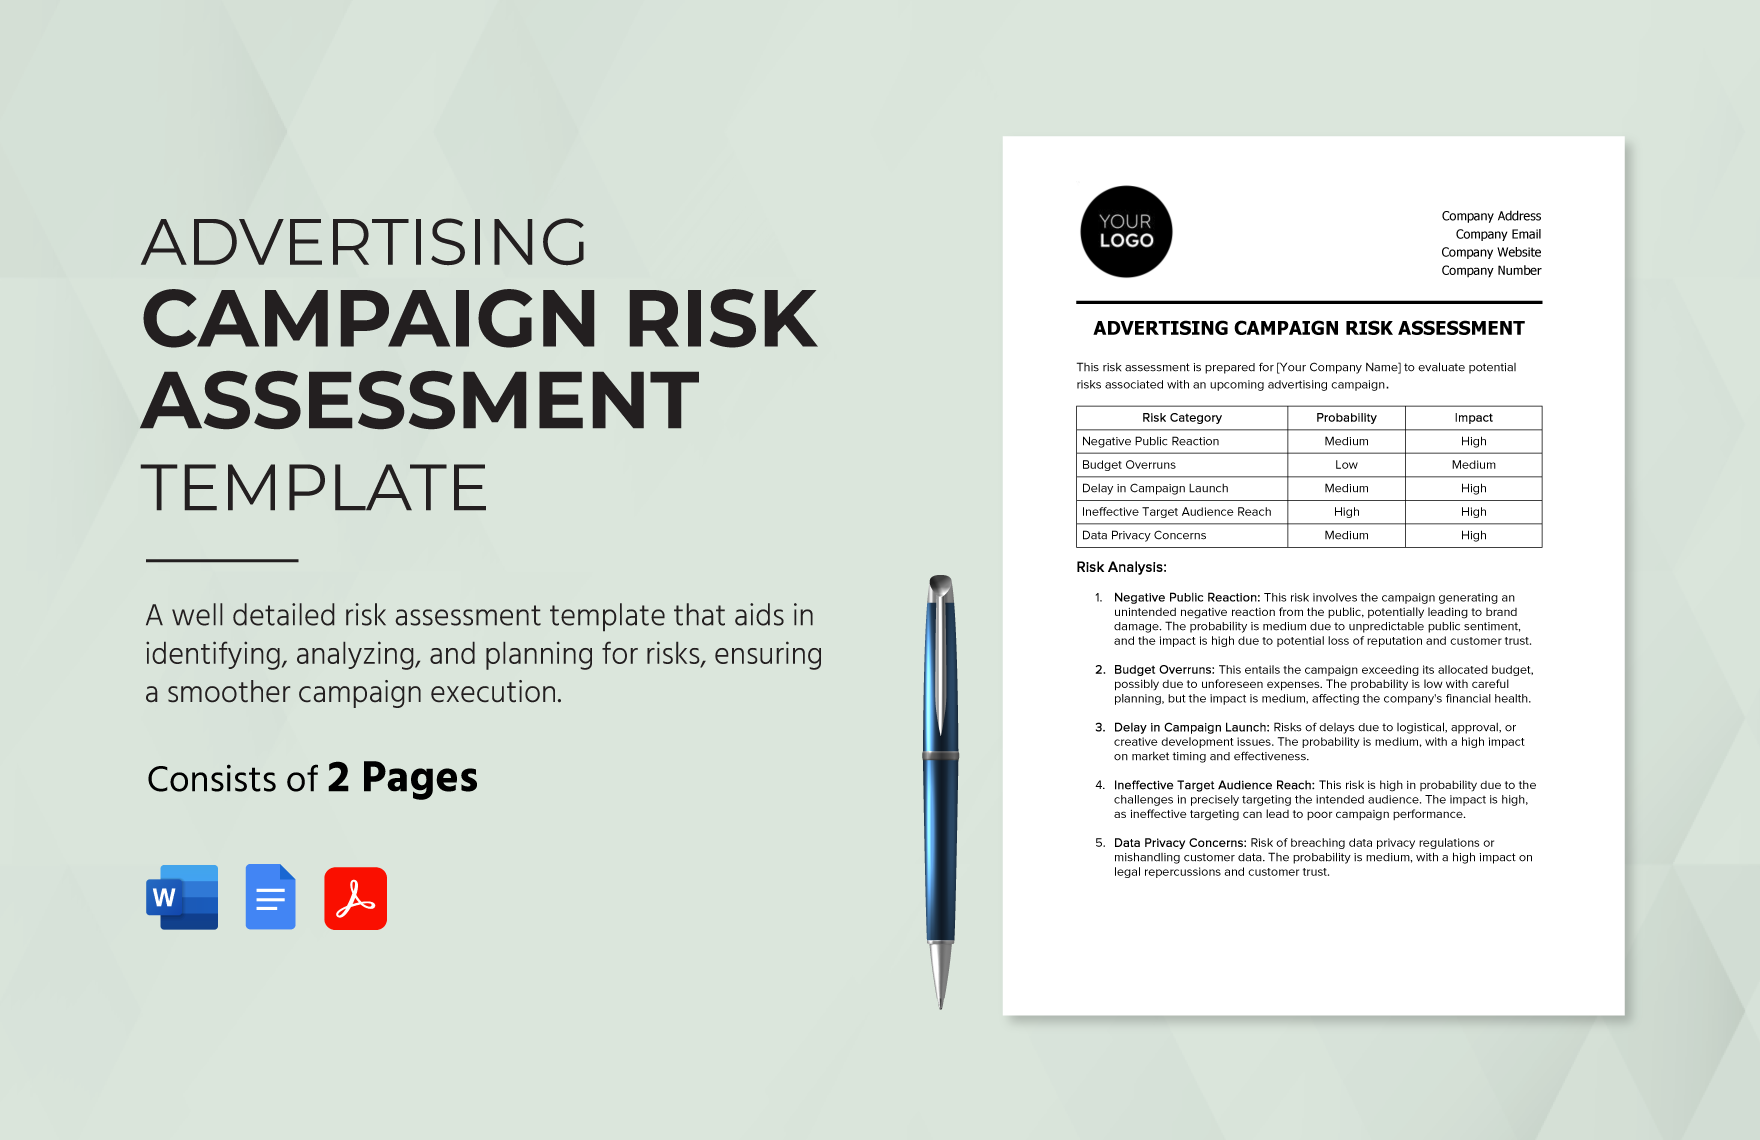 Advertising Campaign Risk Assessment Template in Word, Google Docs, PDF